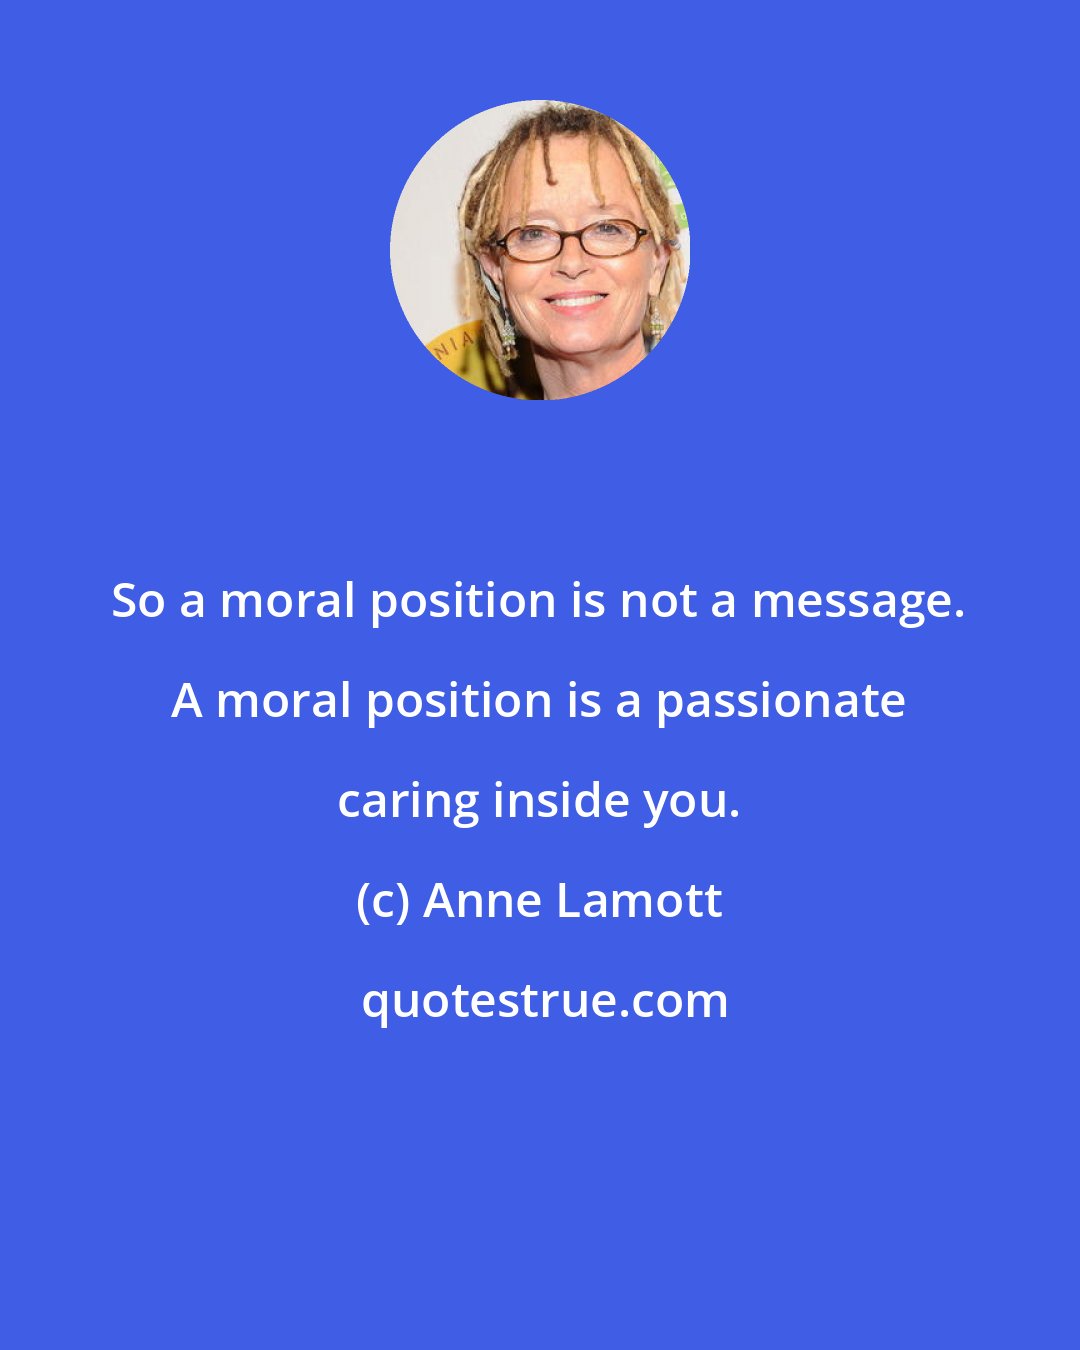 Anne Lamott: So a moral position is not a message. A moral position is a passionate caring inside you.